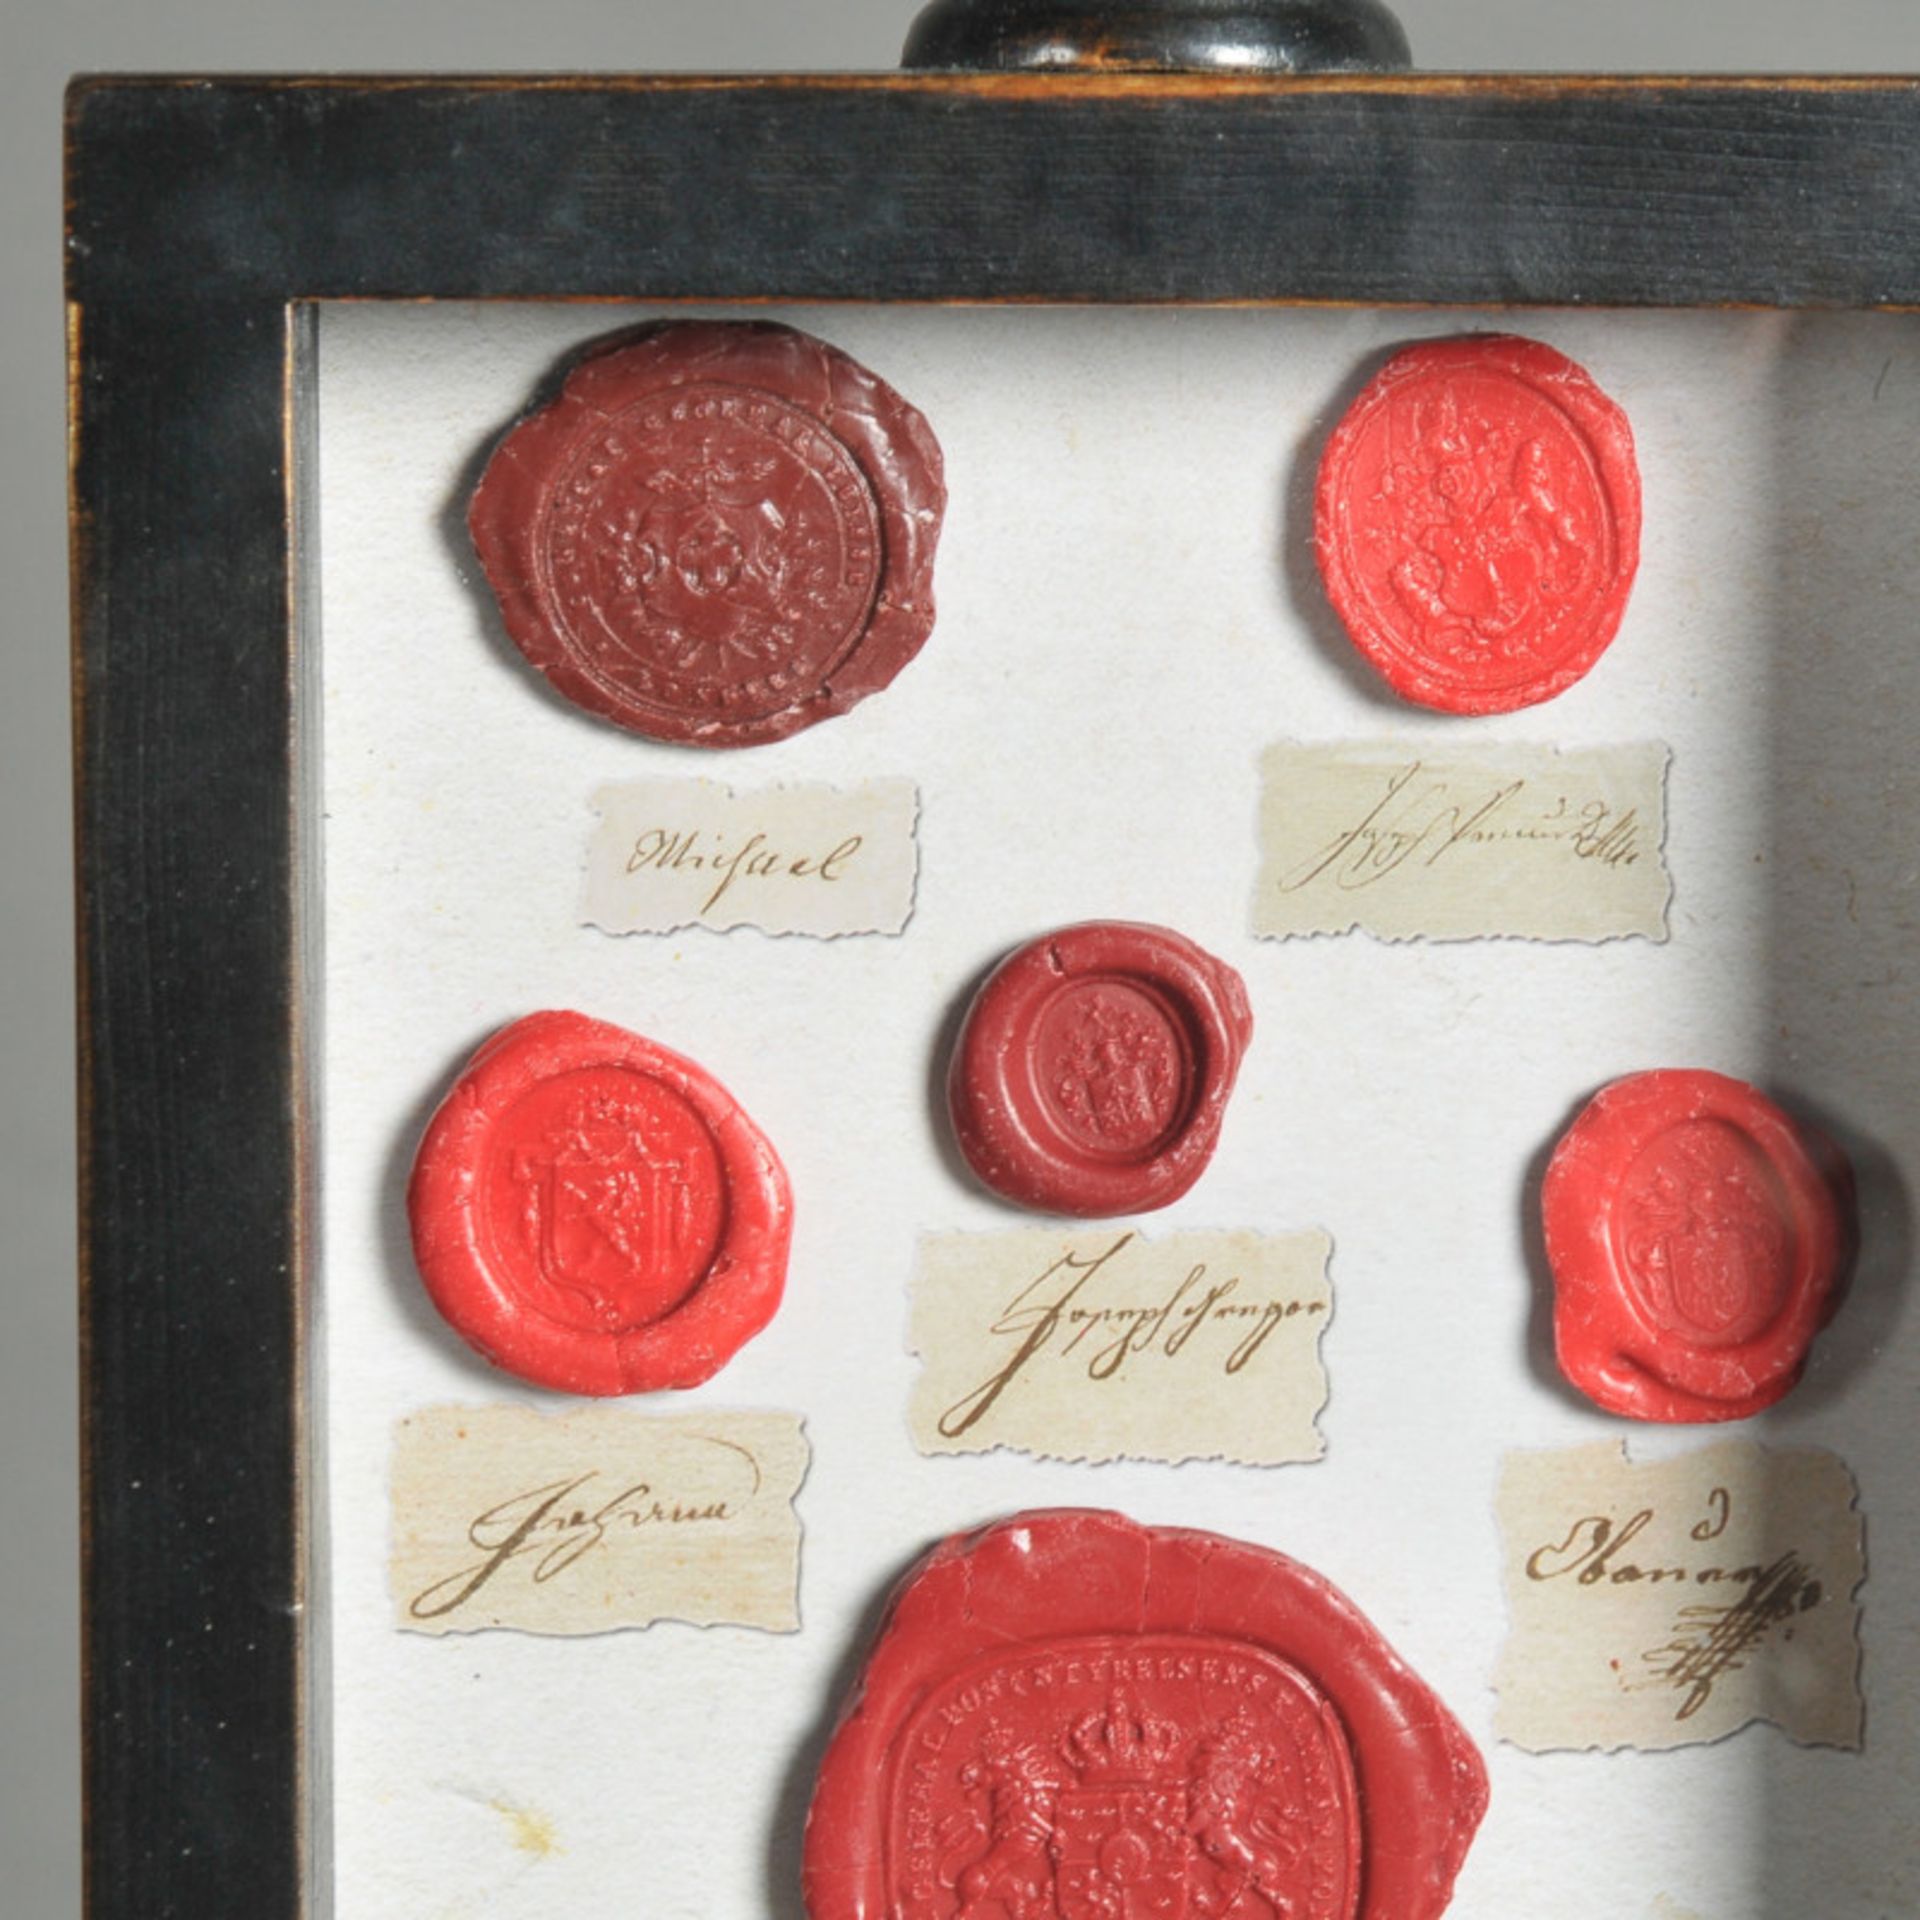 Frames With Wax Seals - Set Of 3 Set Of 3 Wooden Frames / Wax Seals 1 : H44x25x10 Cm - 2 : H36x17x10 - Image 2 of 4